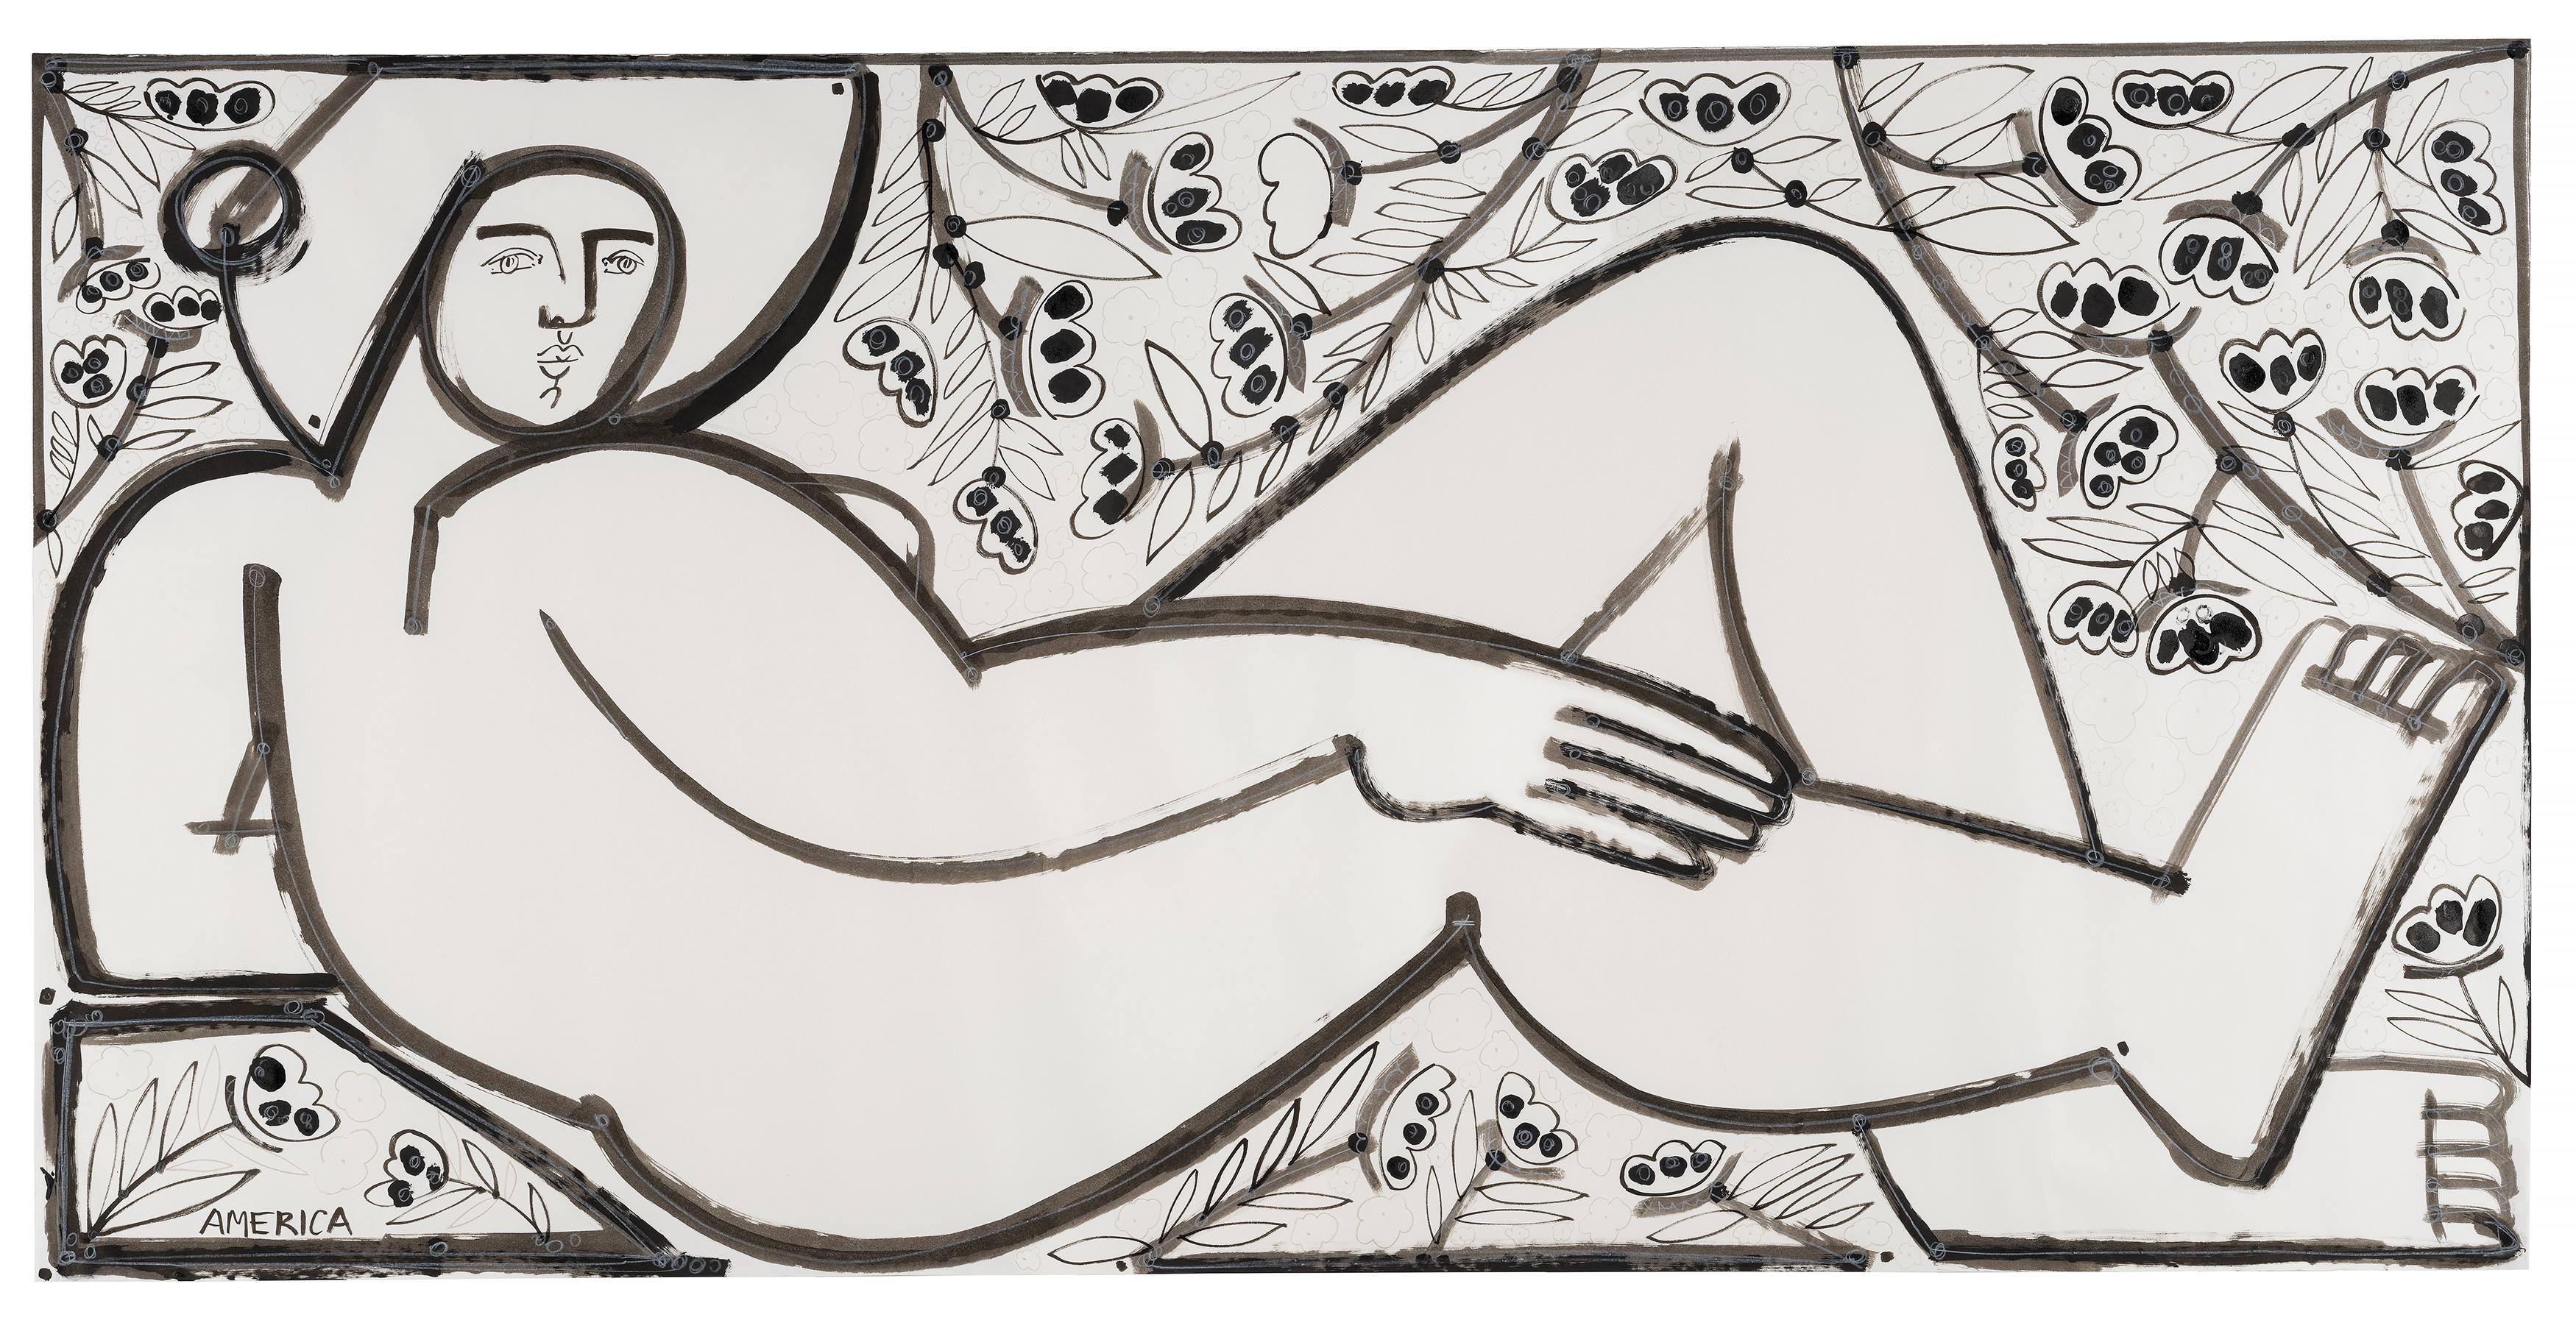 America Martin
"Woman with Leaves & Blossom"
Ink & Pencil on Paper
43.5" x 83.5" Framed 

Exploring the identity of both her namesake and country, LA-based America Martin draws inspiration from her Colombian heritage and the human figure to